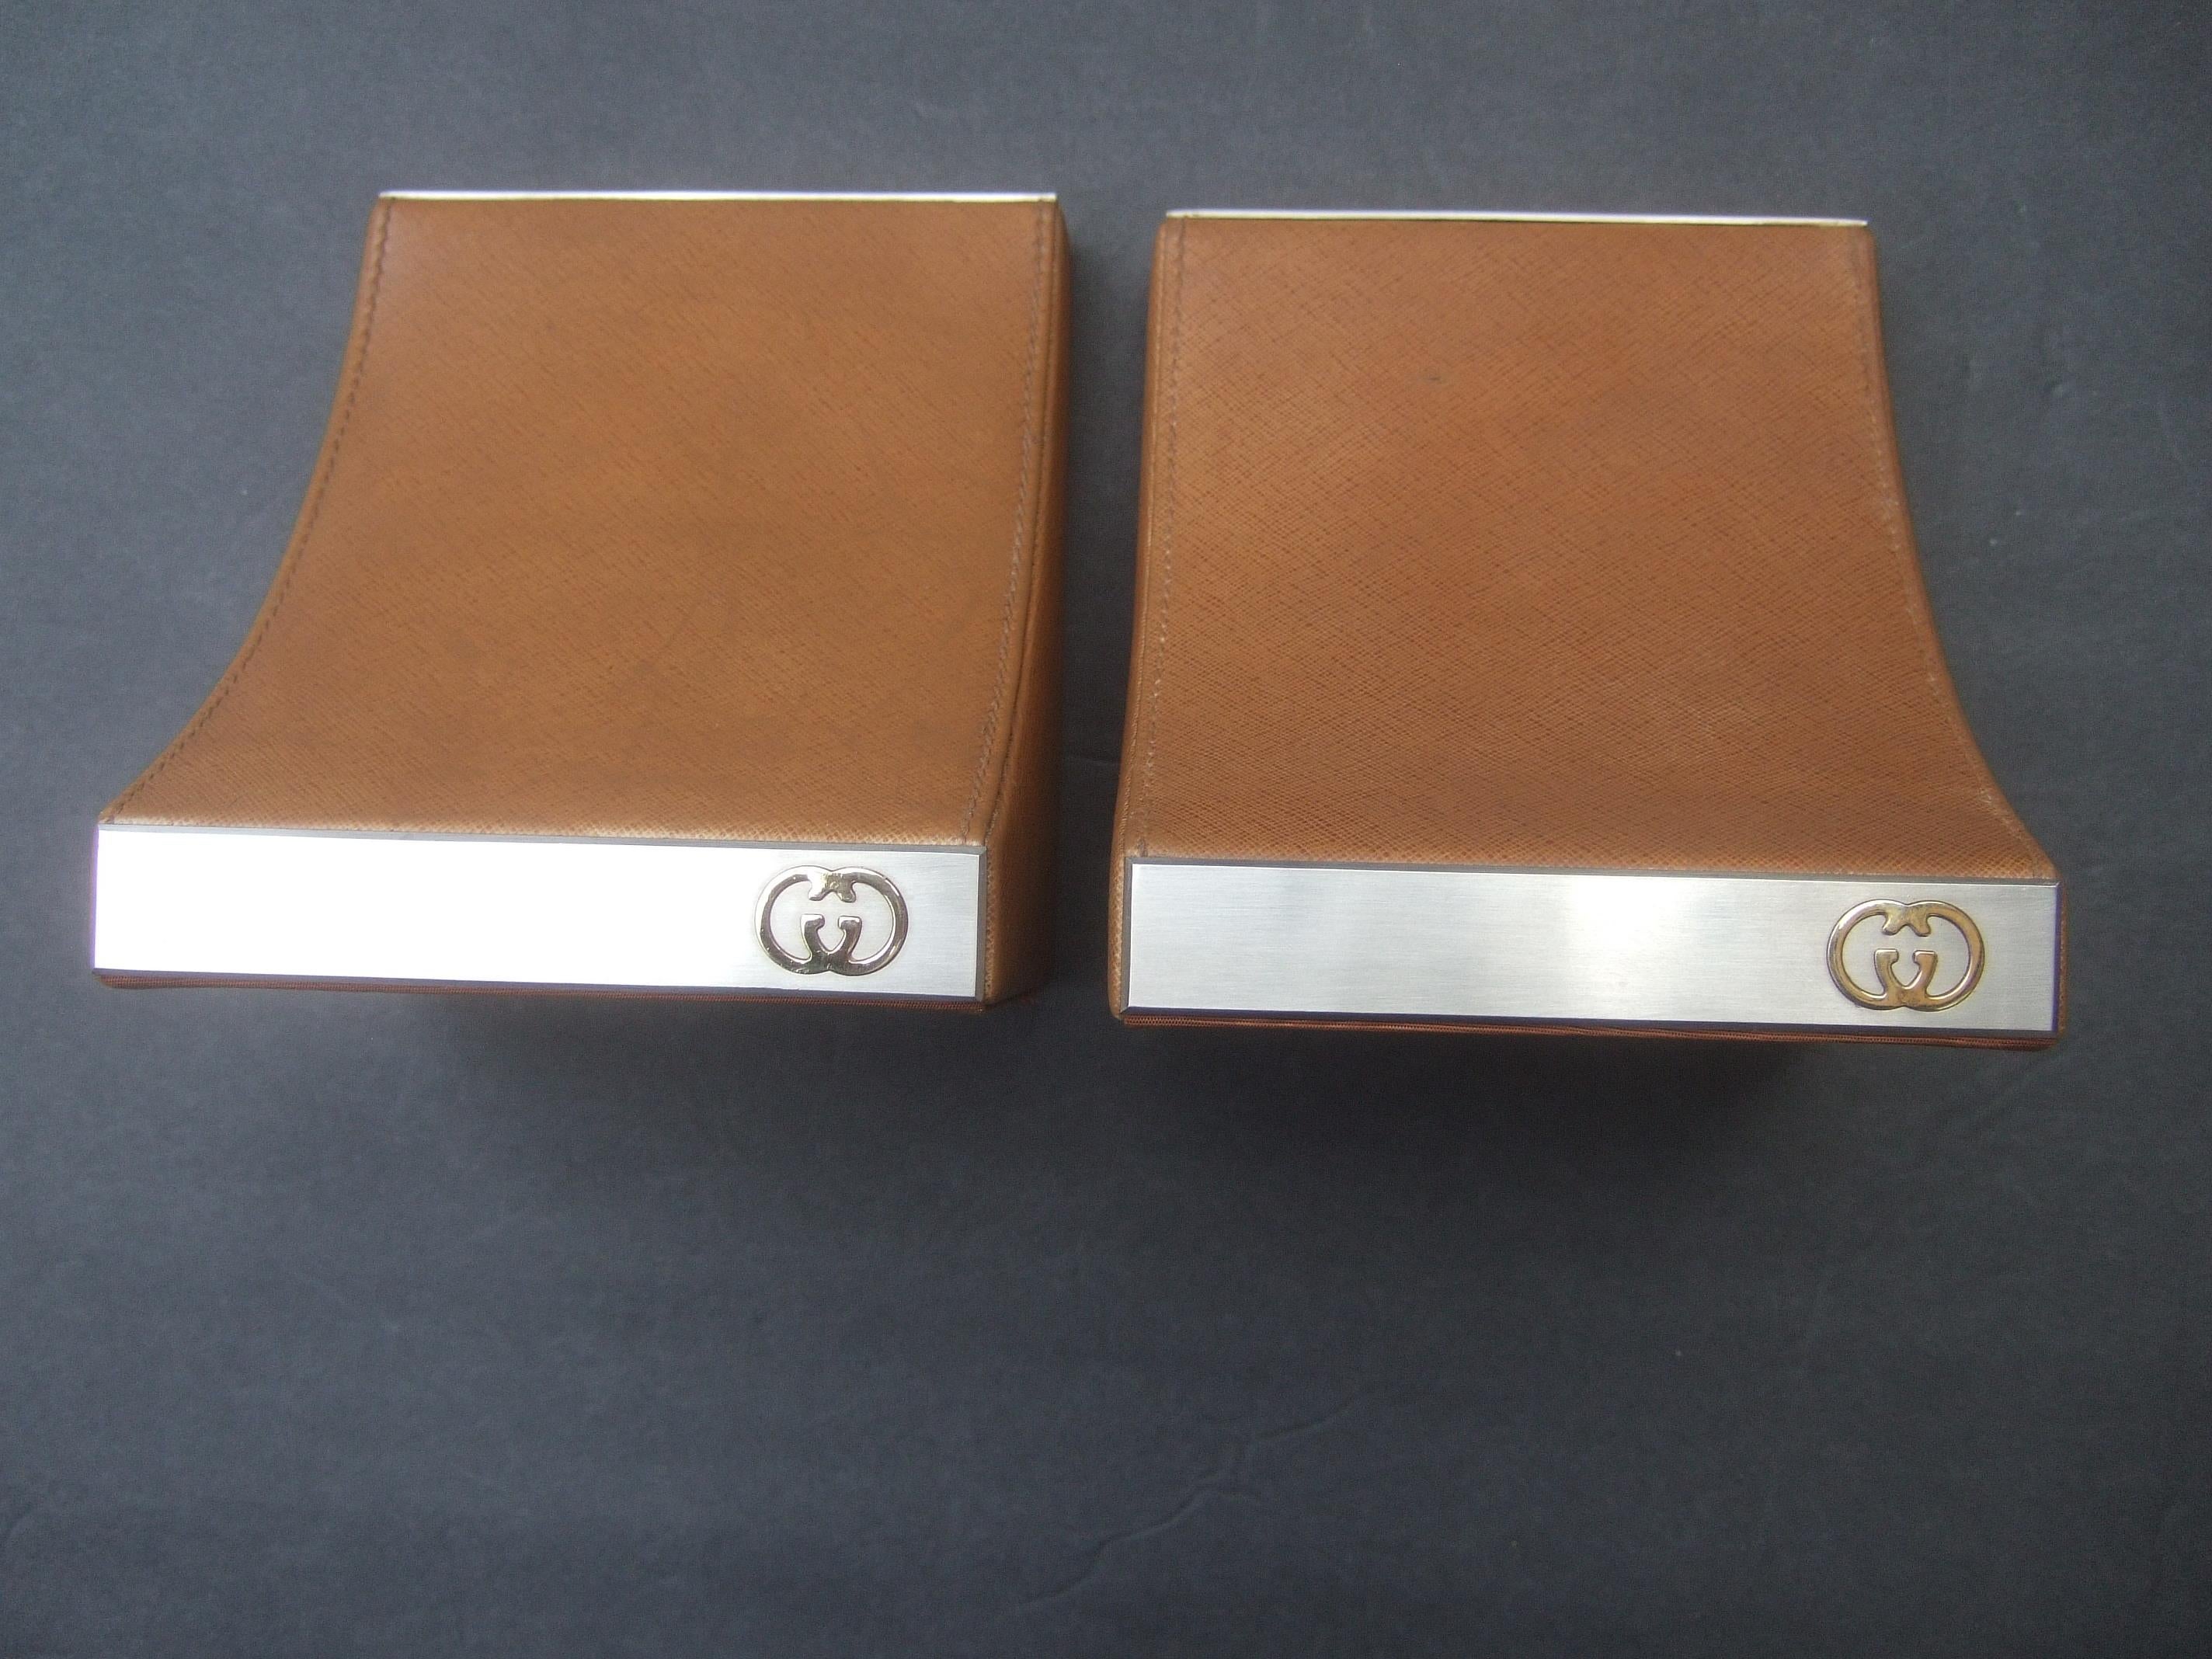 Gucci Italy Rare Caramel Brown Leather Pair of Bookends c 1970s  5